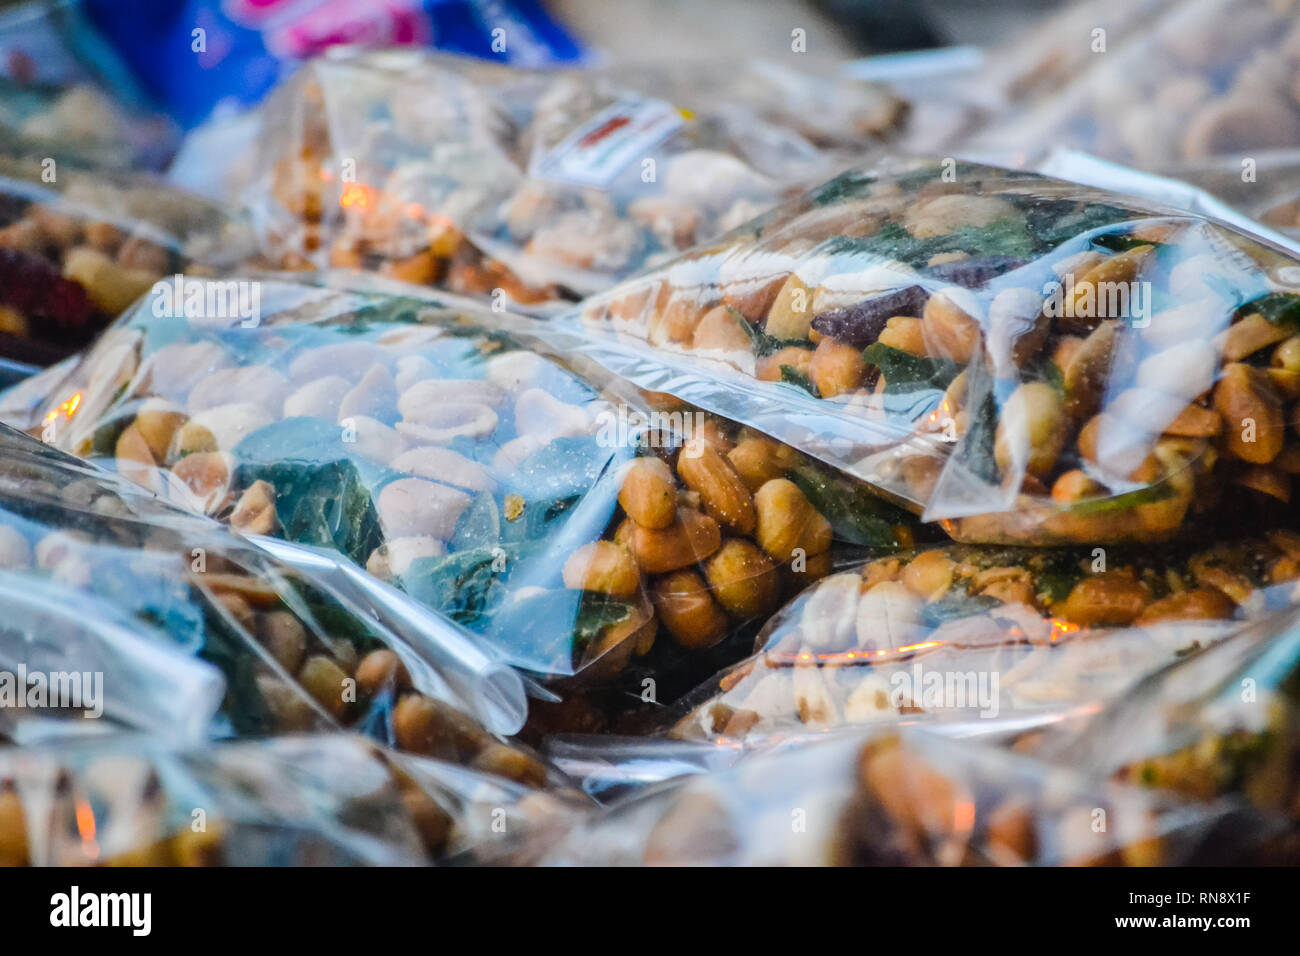 Thai food on the street is popular and sell well, not less than Pad Thai and Tom Yum Shrimp are various curries. Insect, fresh frogs, vegetables, frui Stock Photo